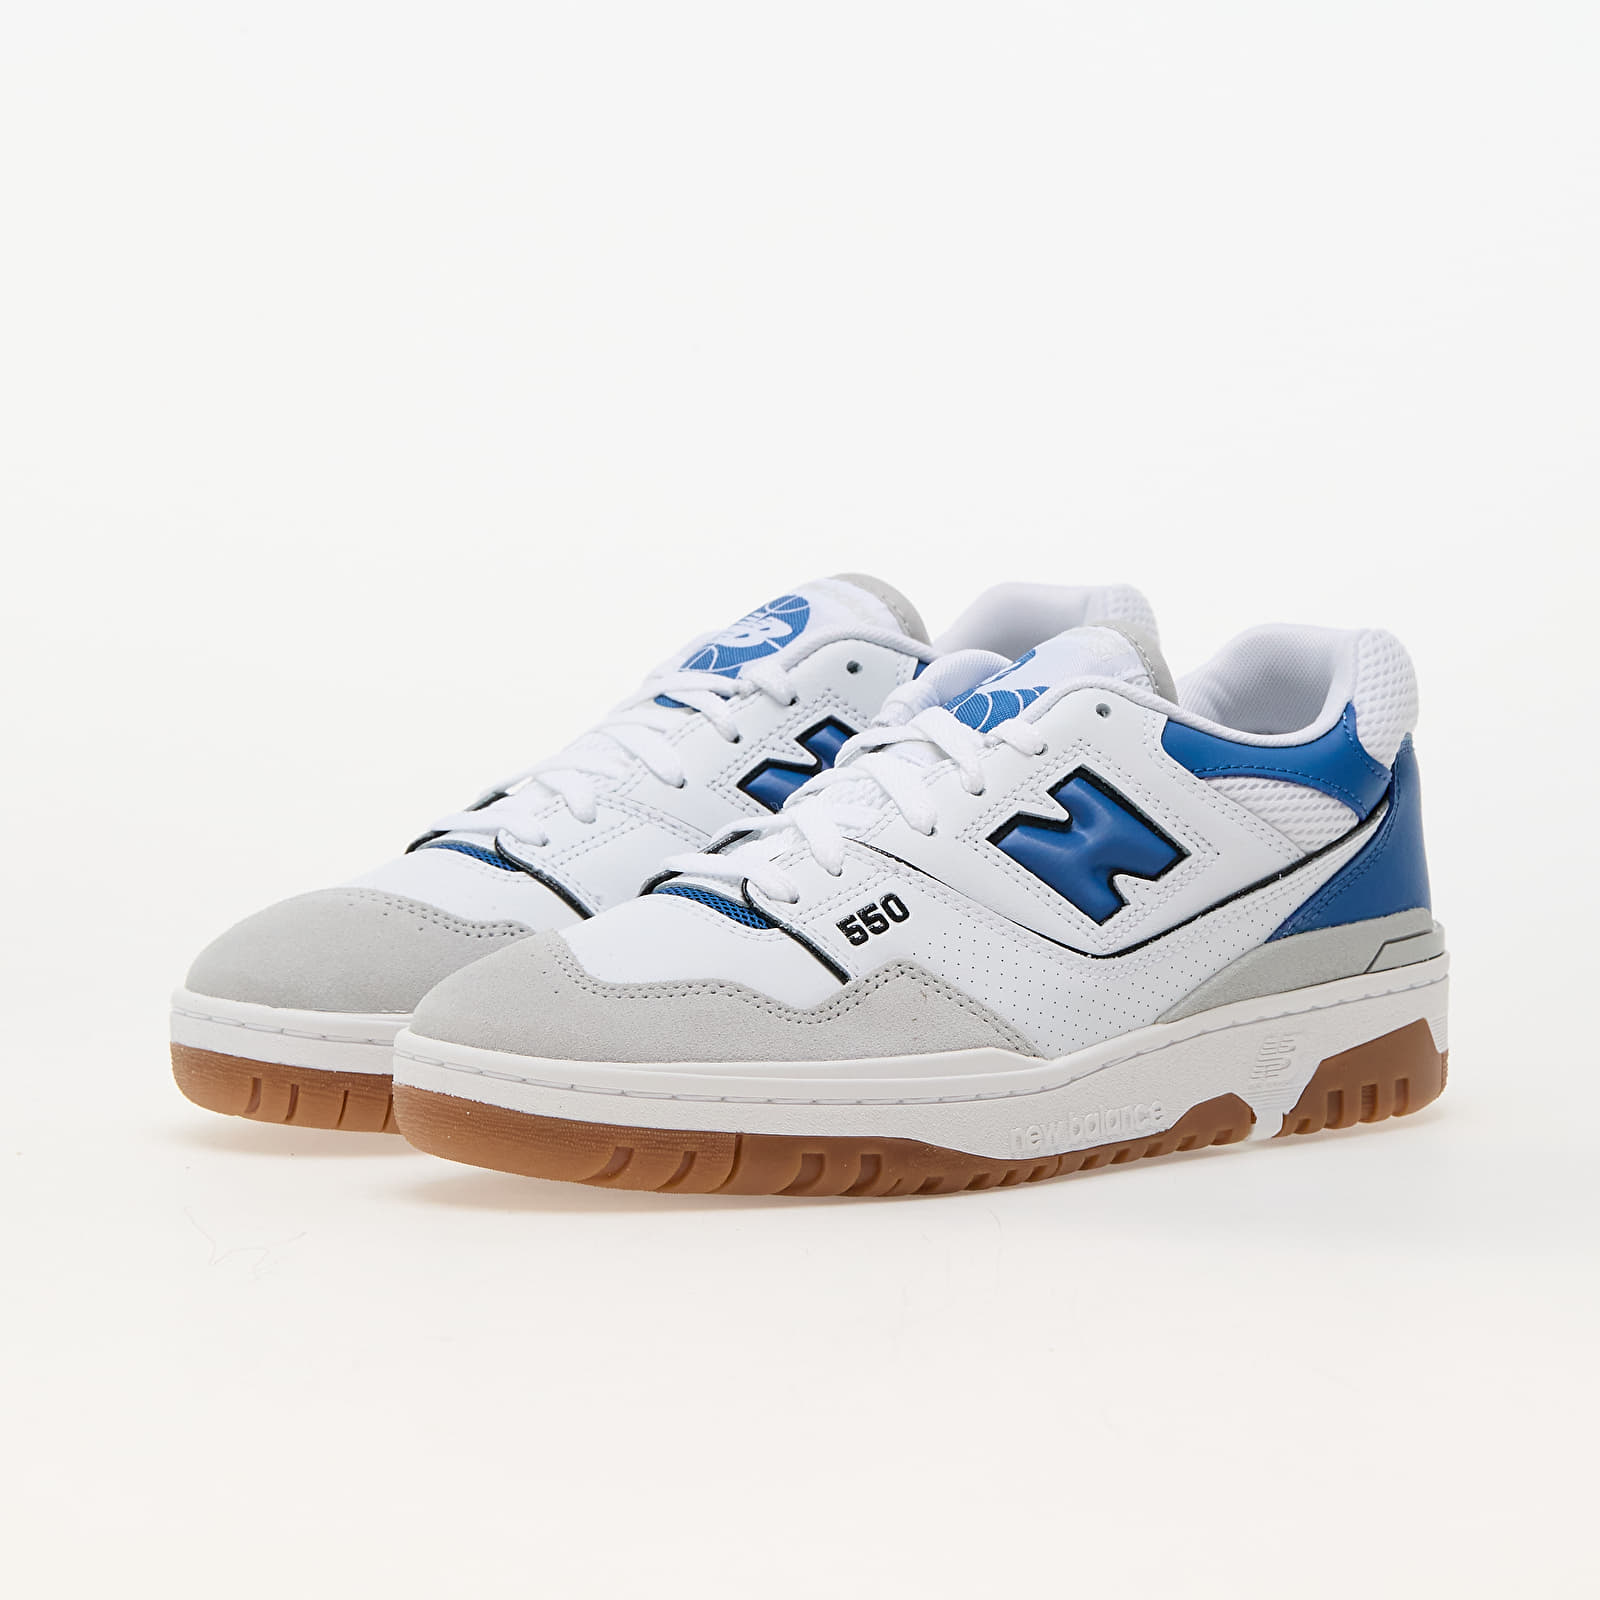 NEW BALANCE: SNEAKERS, NEW BALANCE KIDS 550 SNEAKERS, 52% OFF